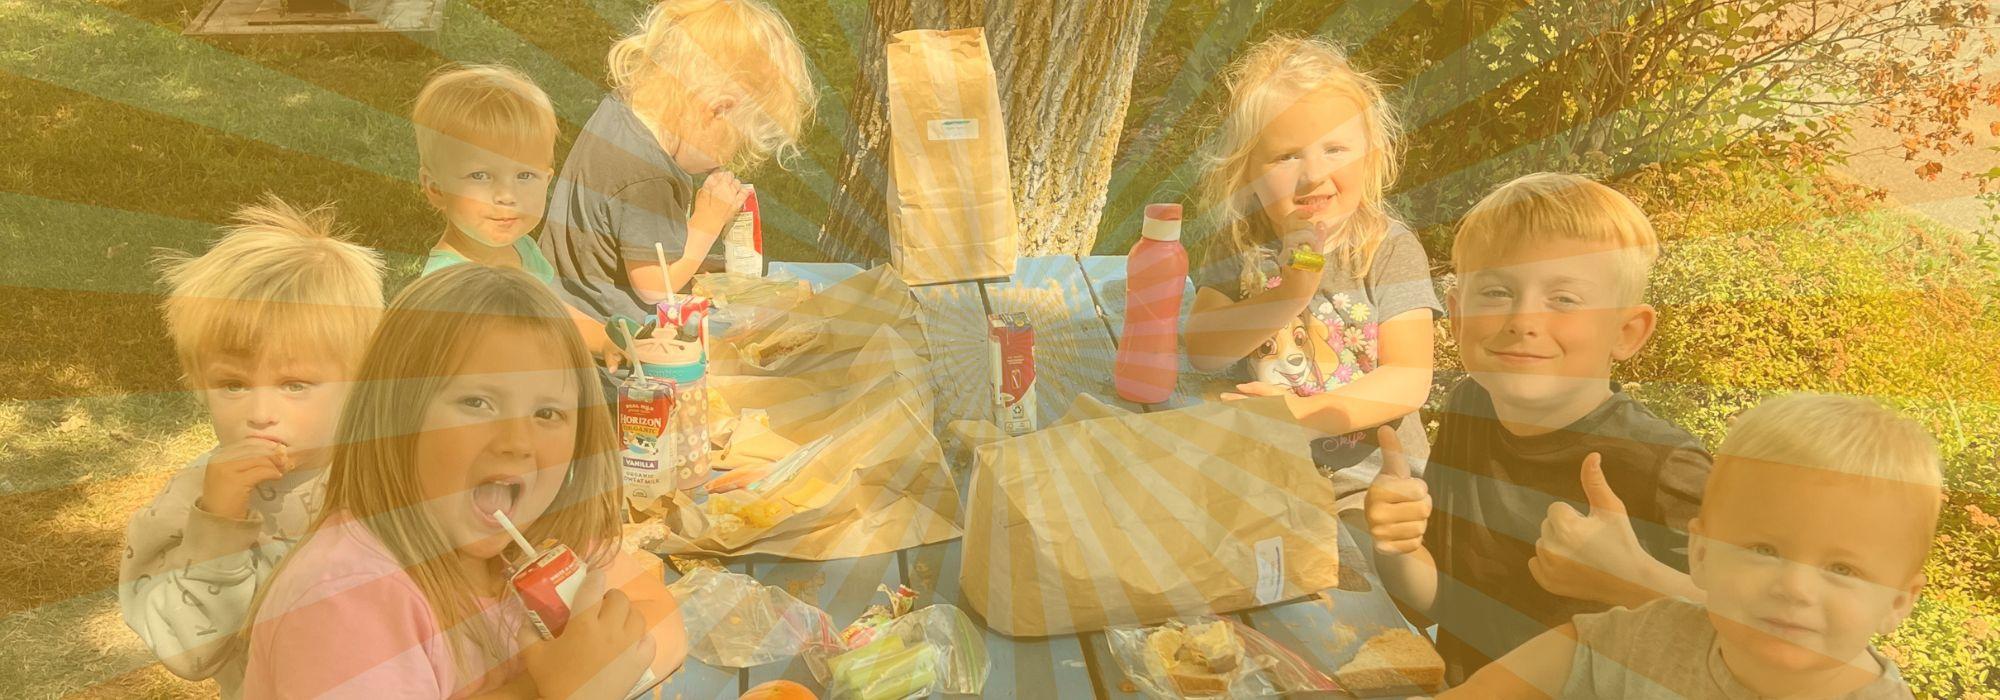 Children eat lunch at picnic table behind a yellow sunburst